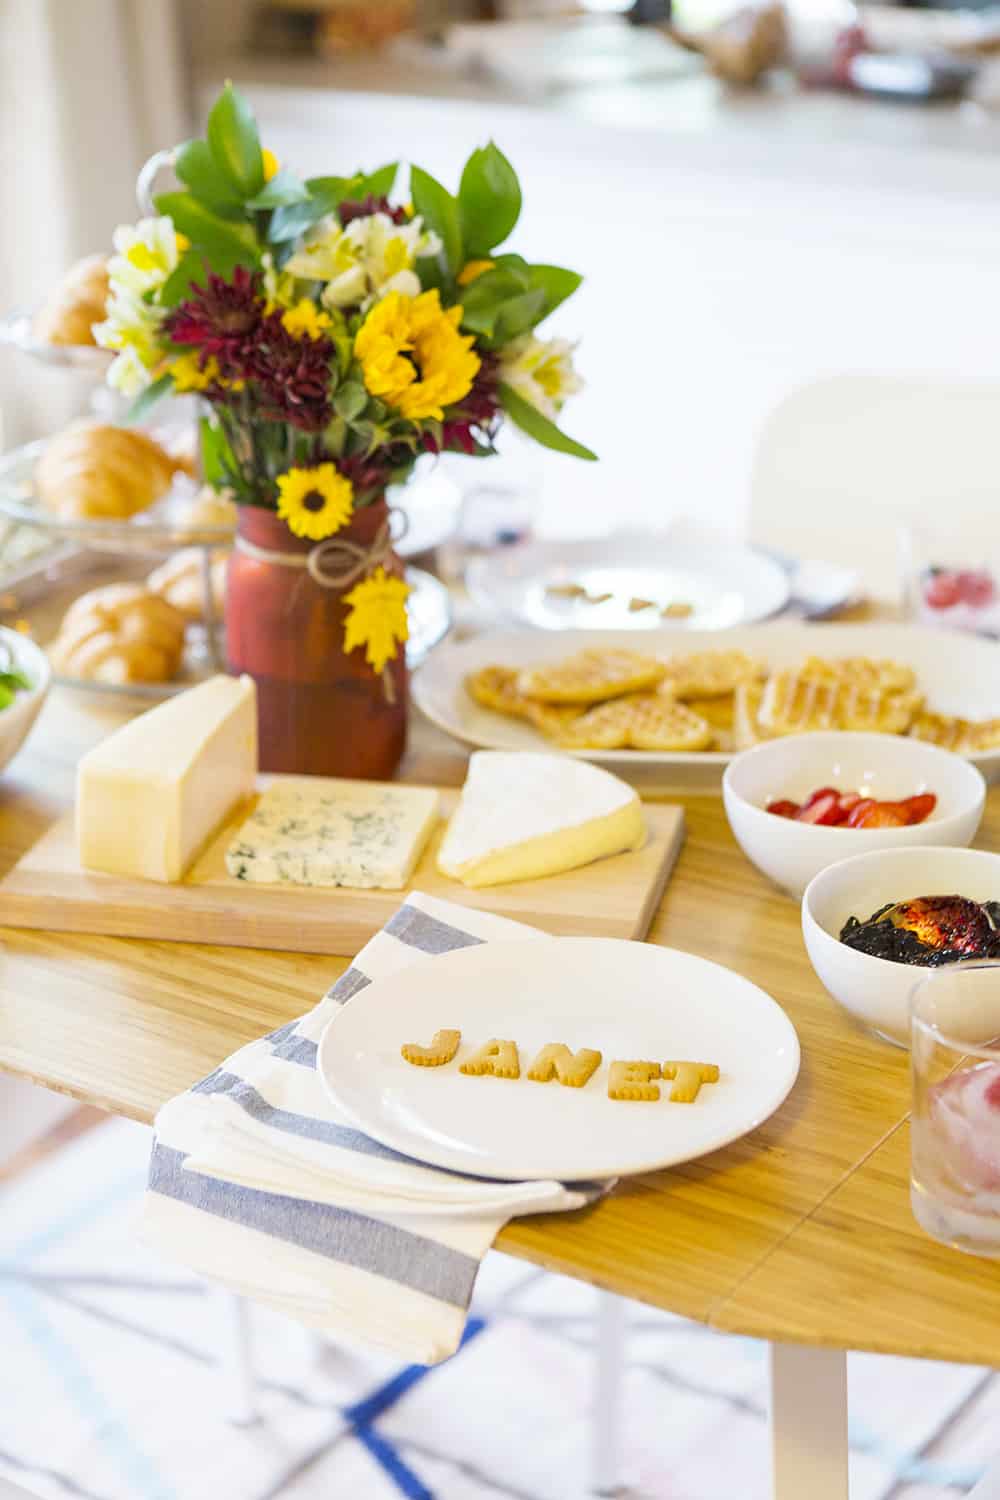 10 Tips For Hosting A Successful Dinner Party